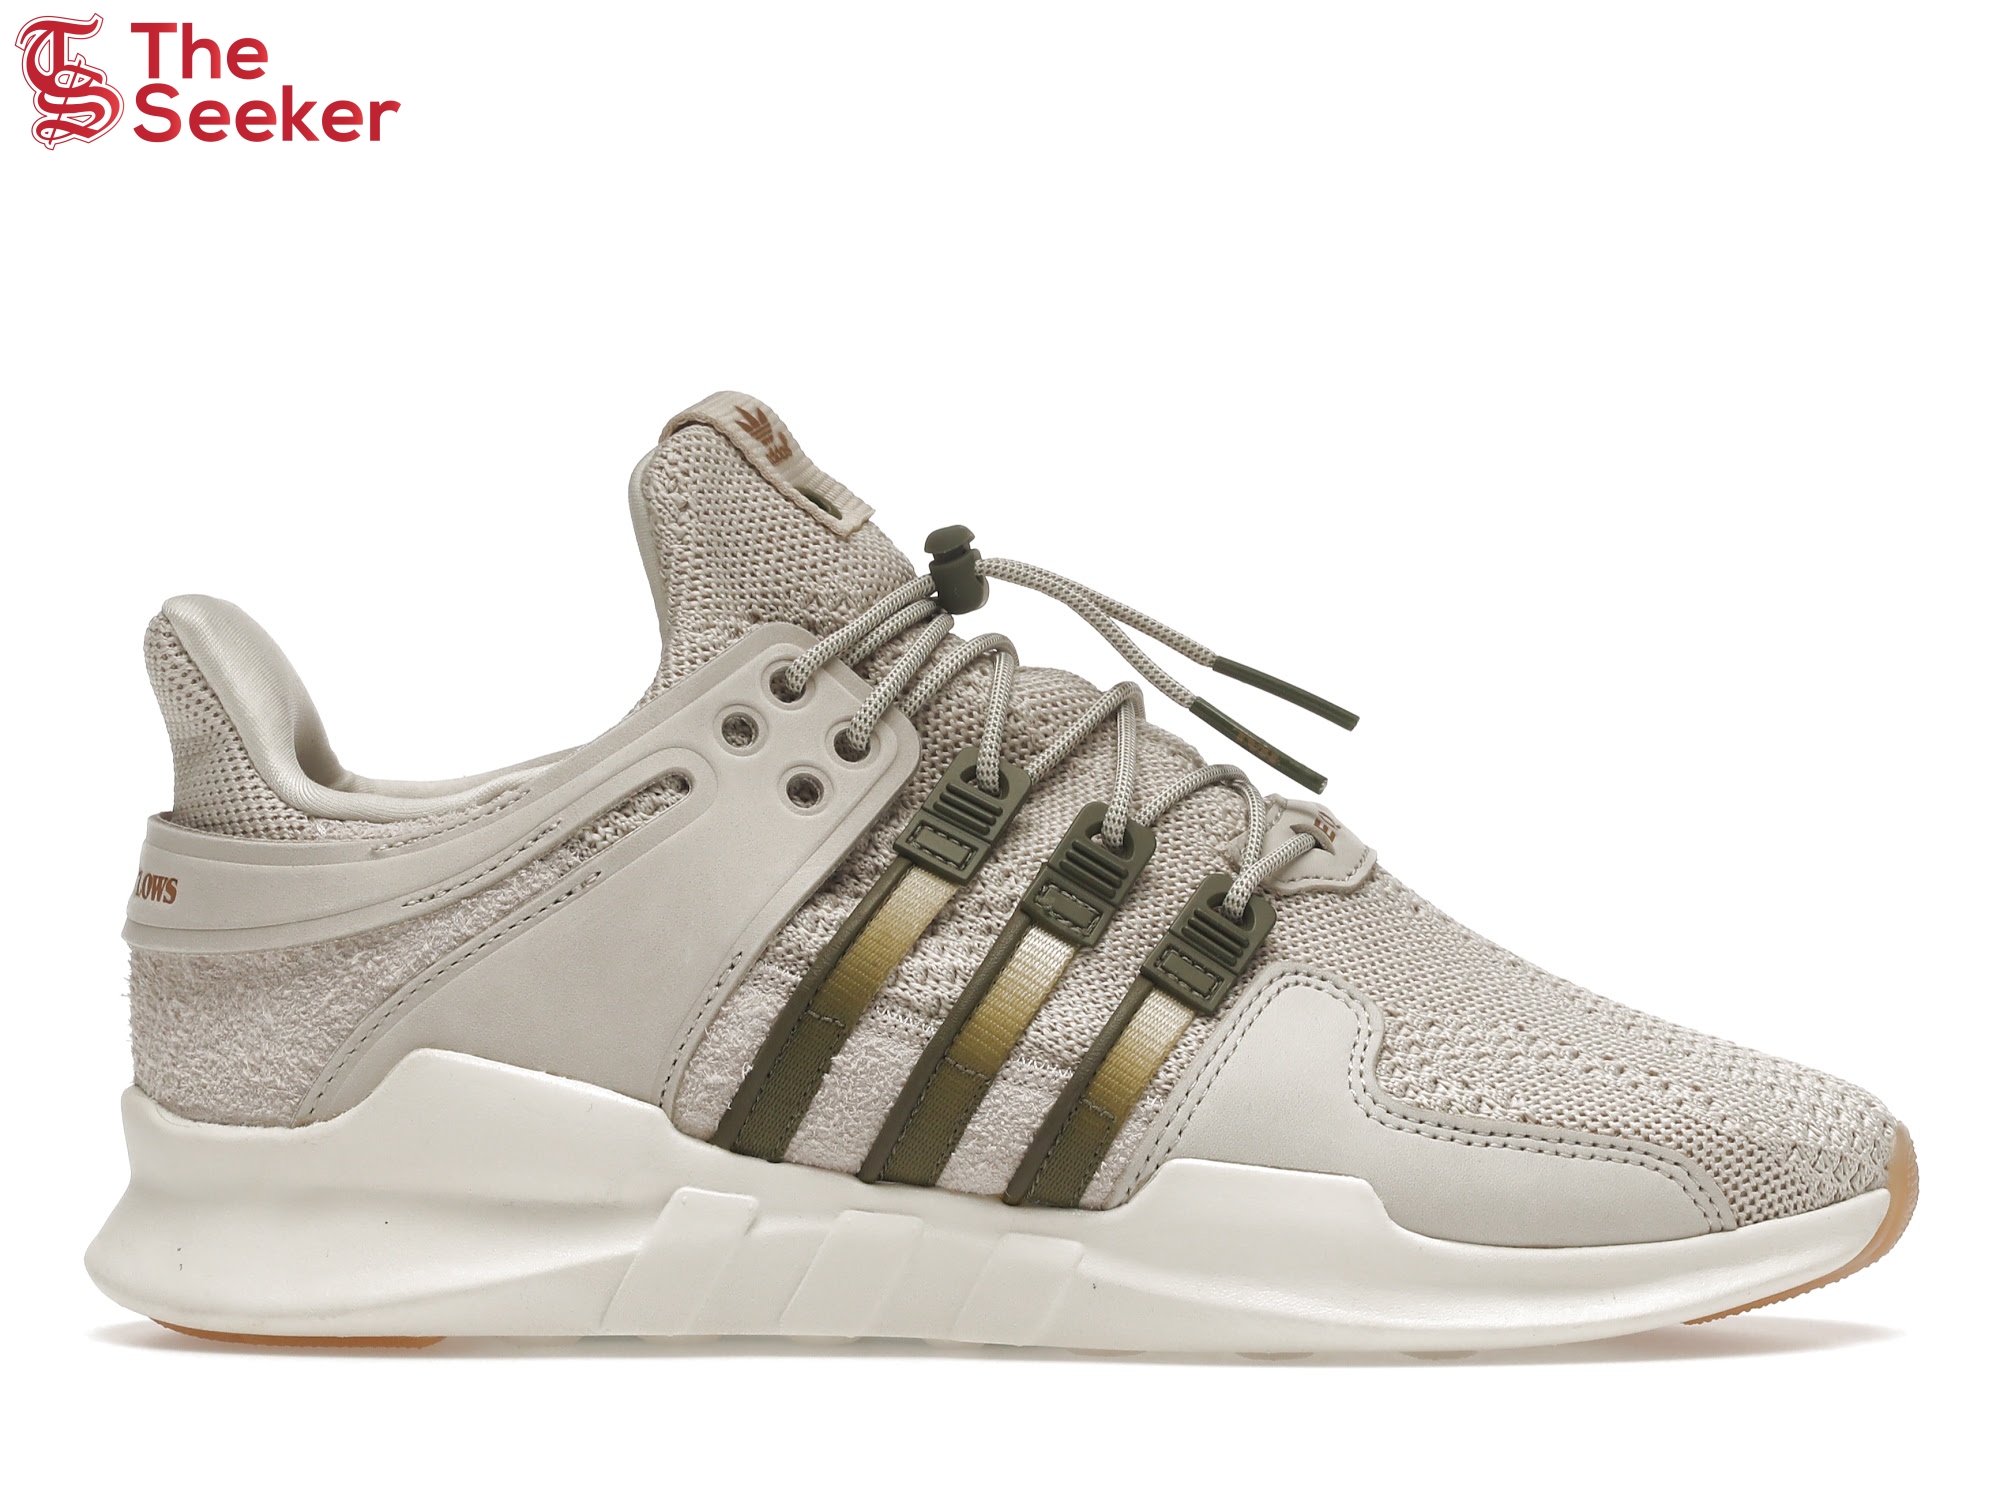 adidas EQT Support Adv Highs and Lows Renaissance